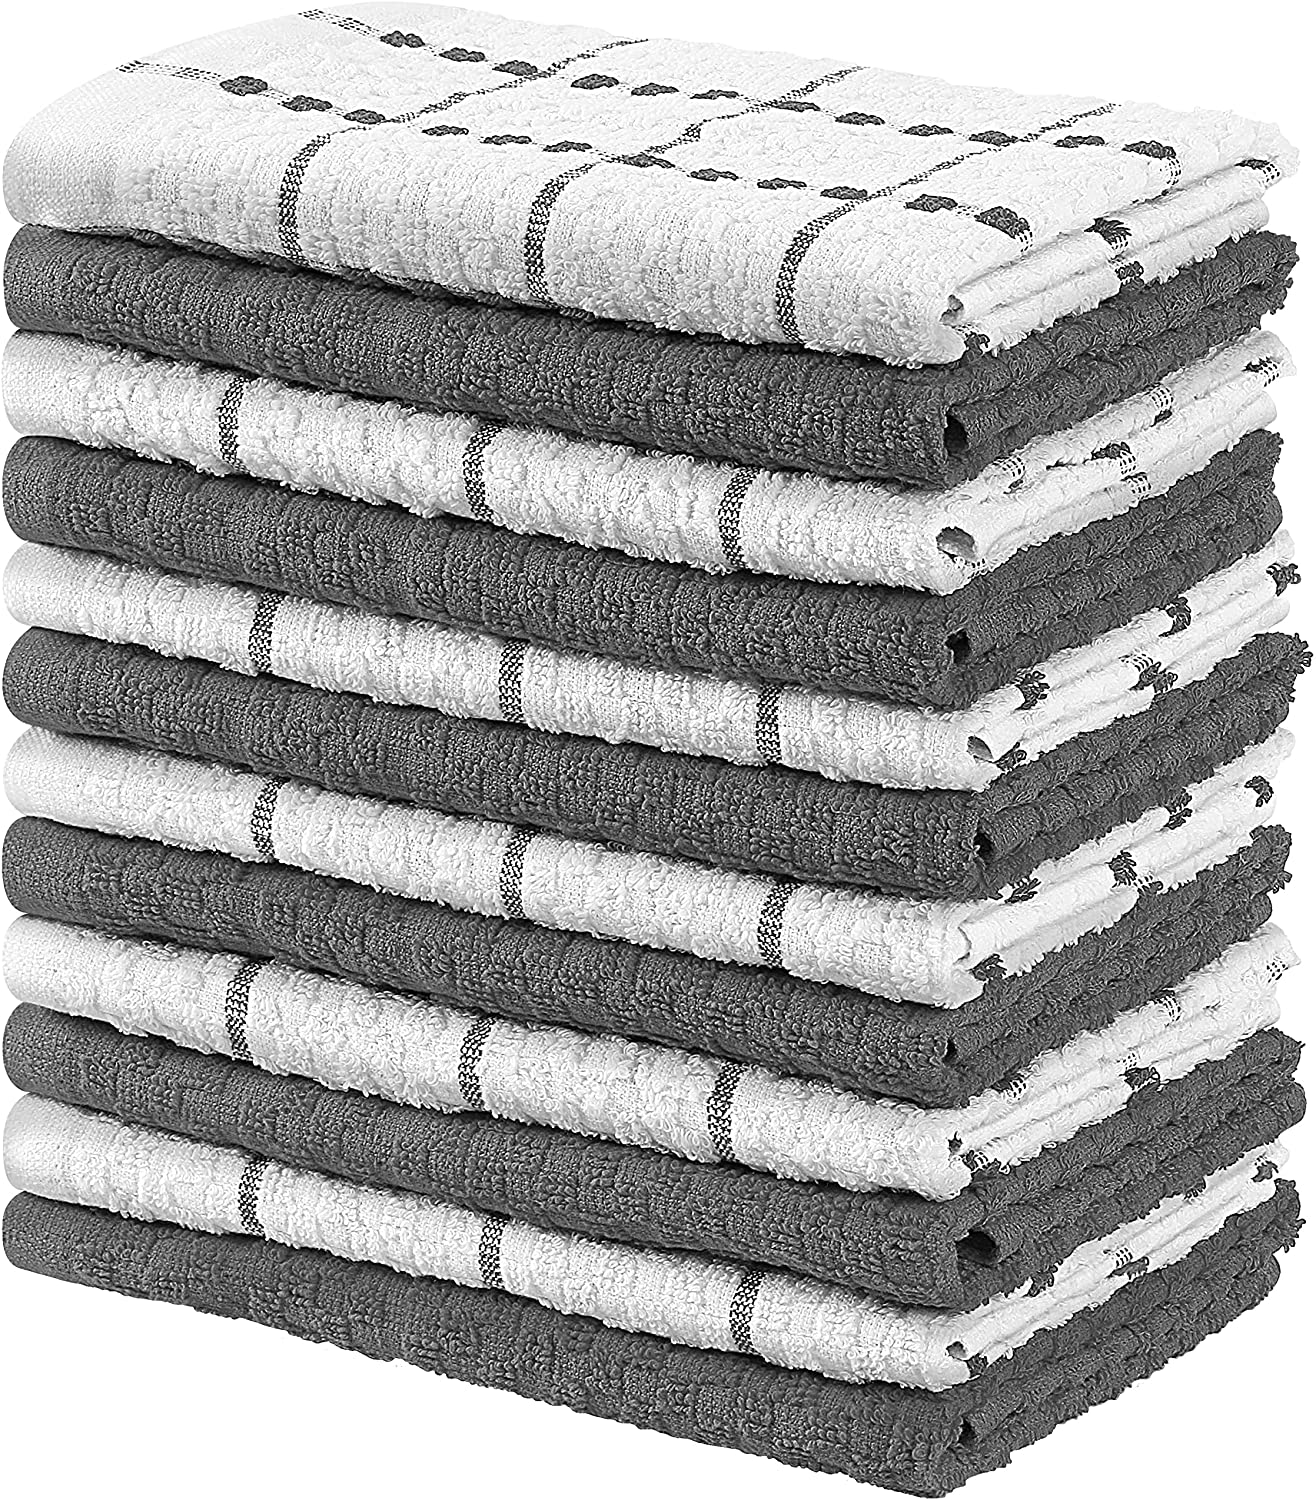  Utopia Towels Kitchen Towels [6 Pack], 15 x 25 Inches